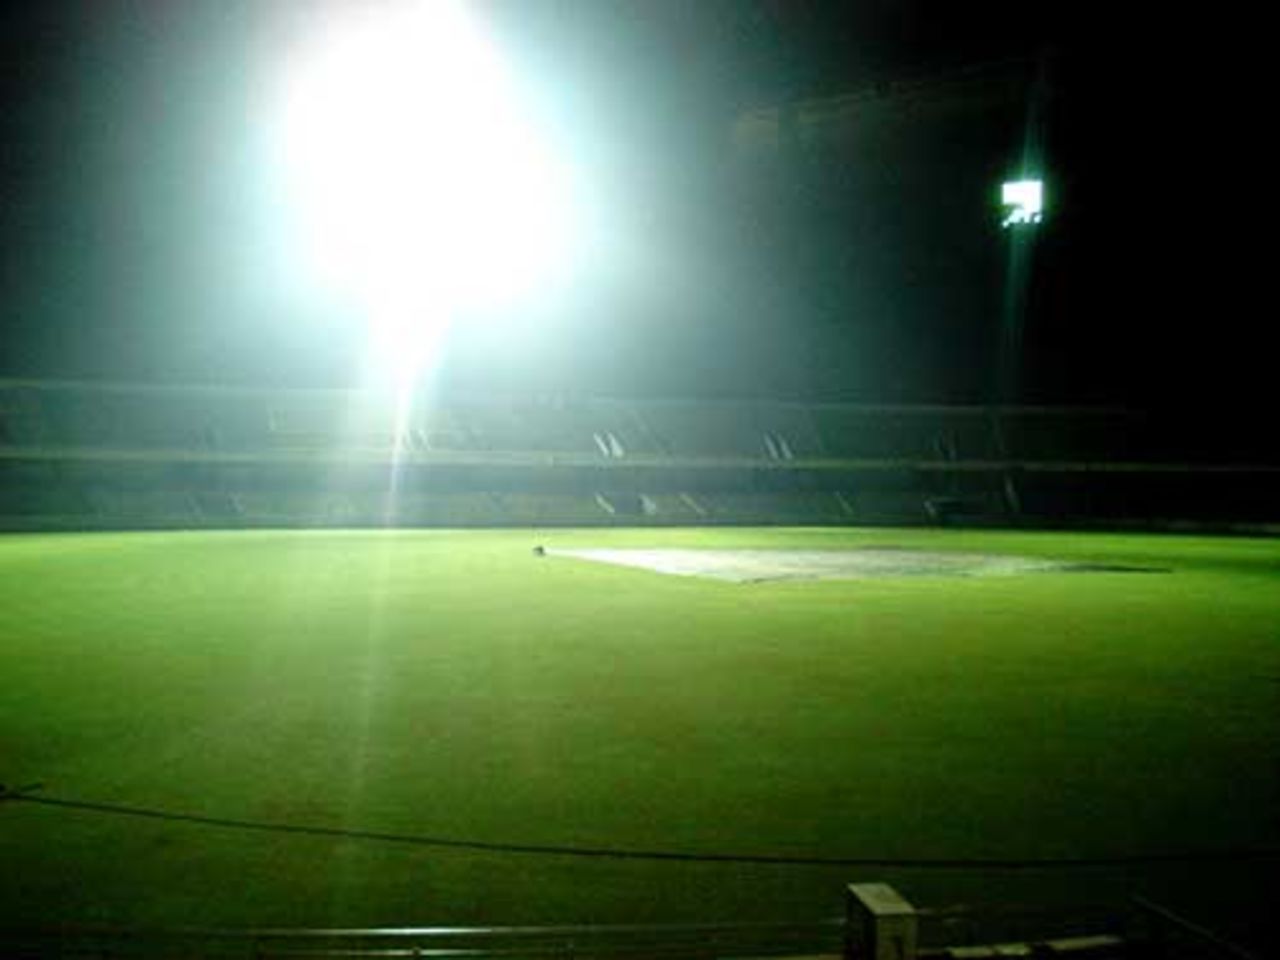 The new floodlights are tested at the Shere Bangla Stadium, Mirpur, October 6, 2009